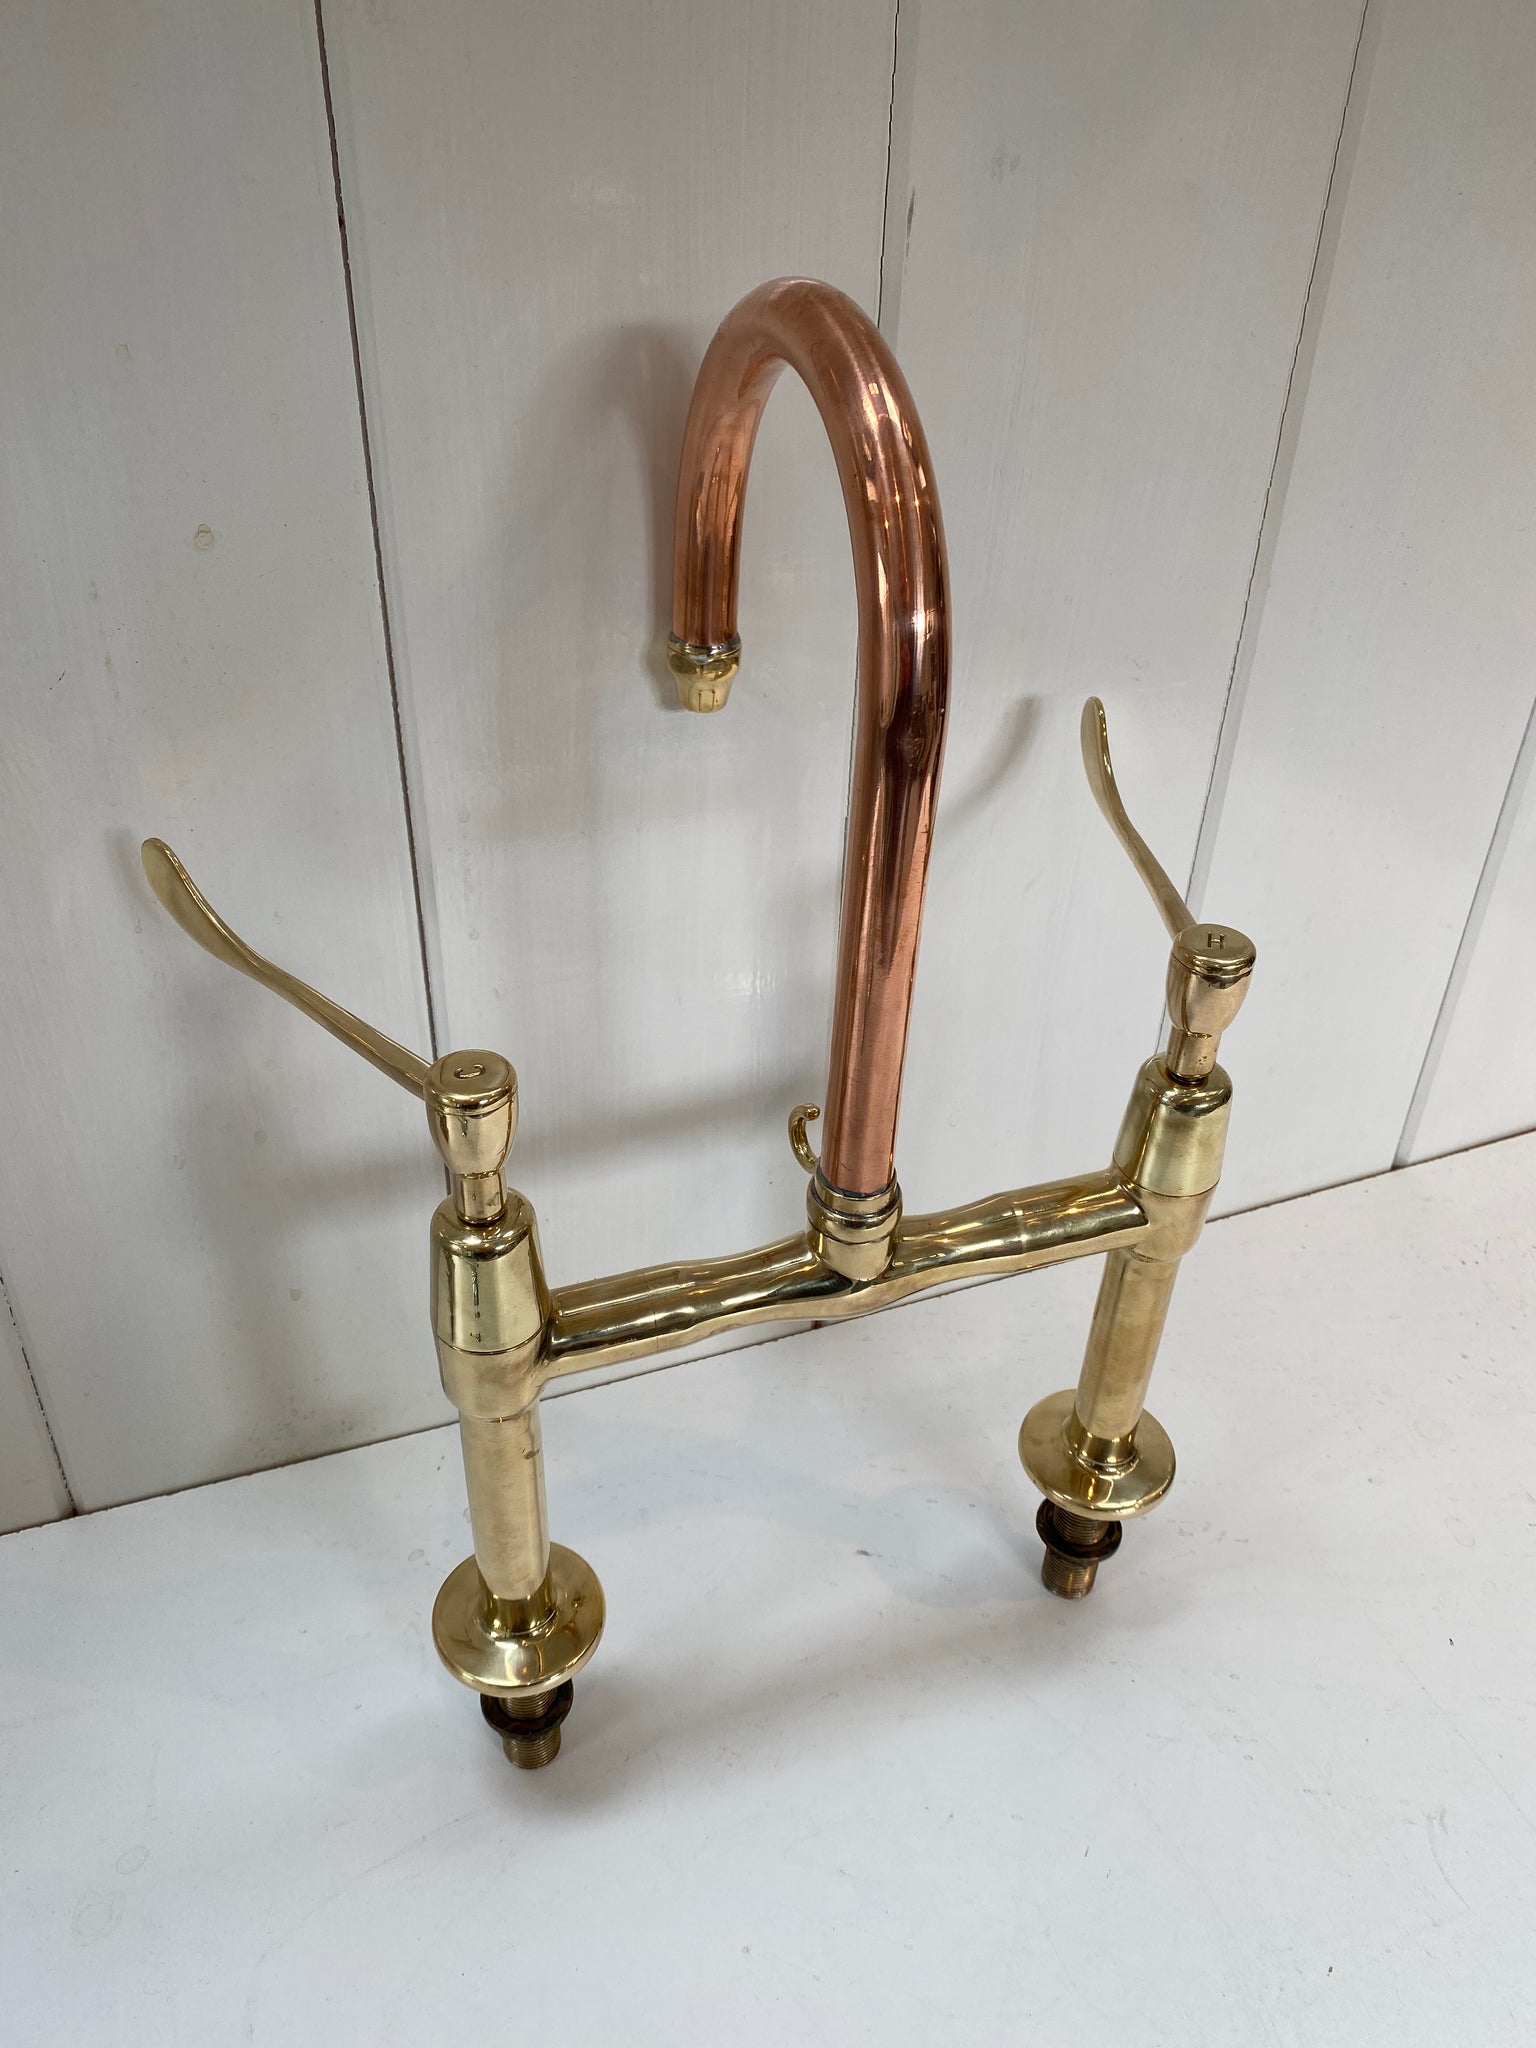 swan neck copper spouted lever mixer tap c.1930 by twyfords